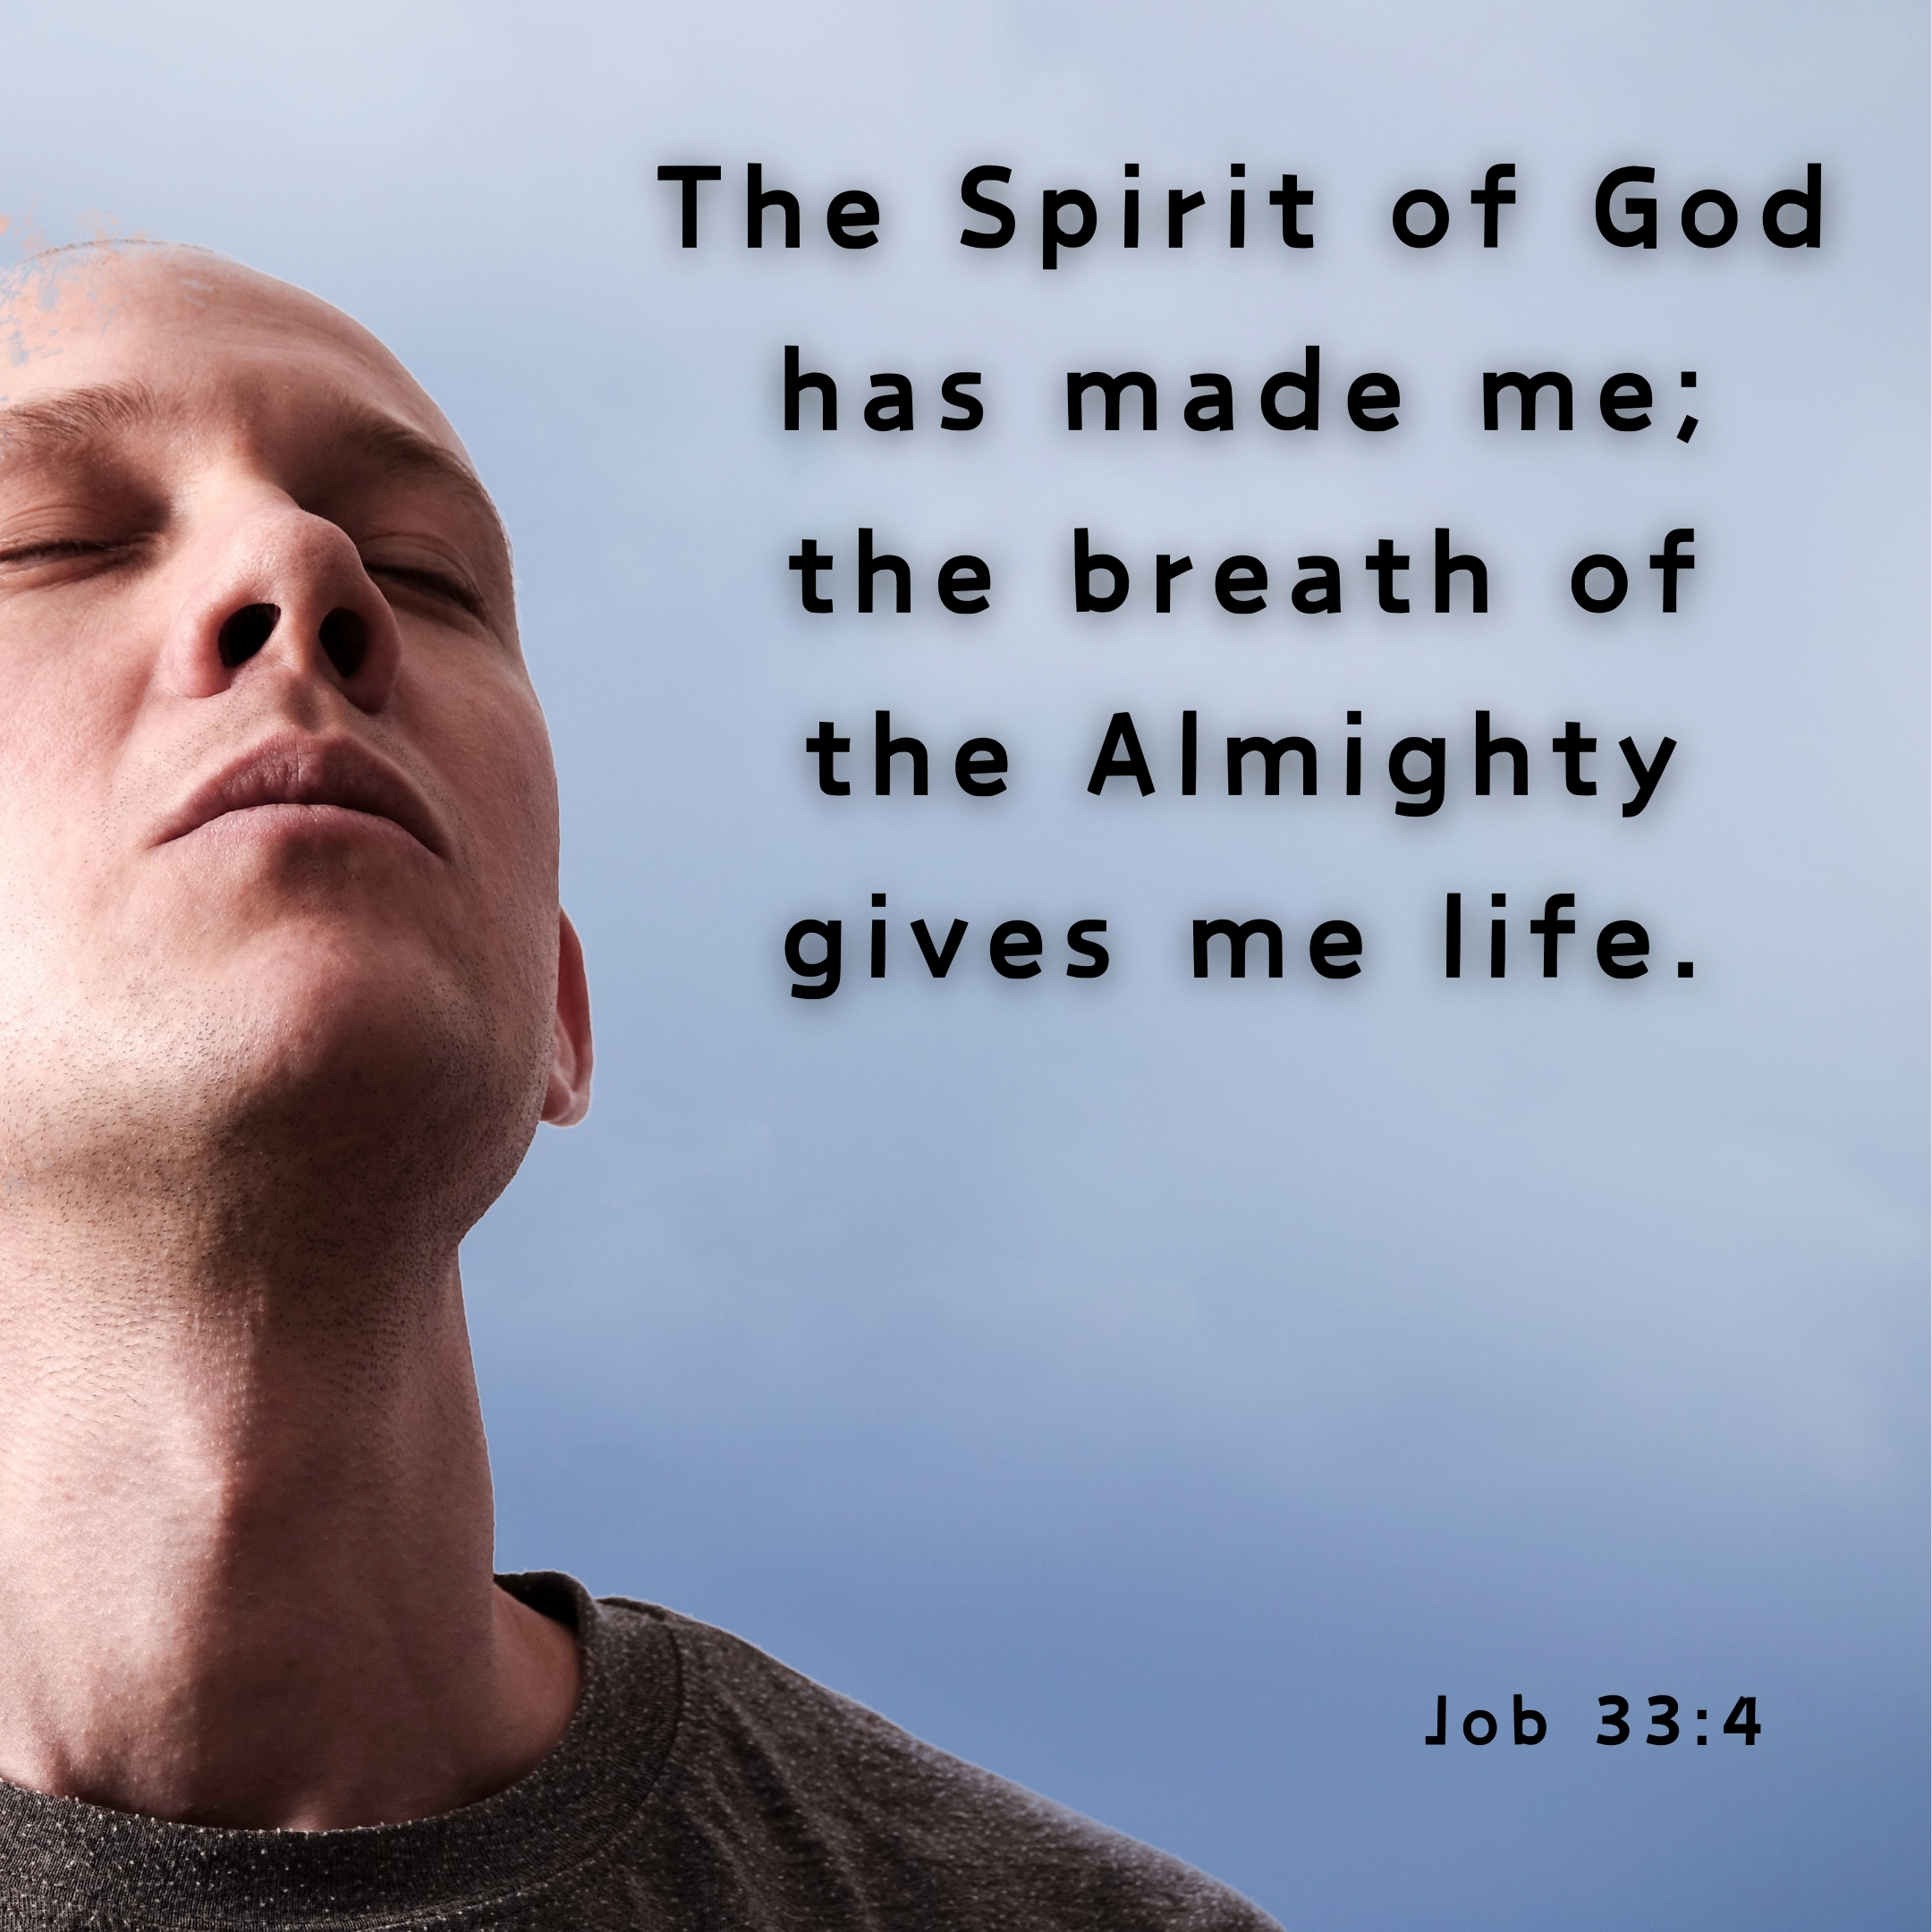 The Breath of Life: A Reflection on Job 33:4